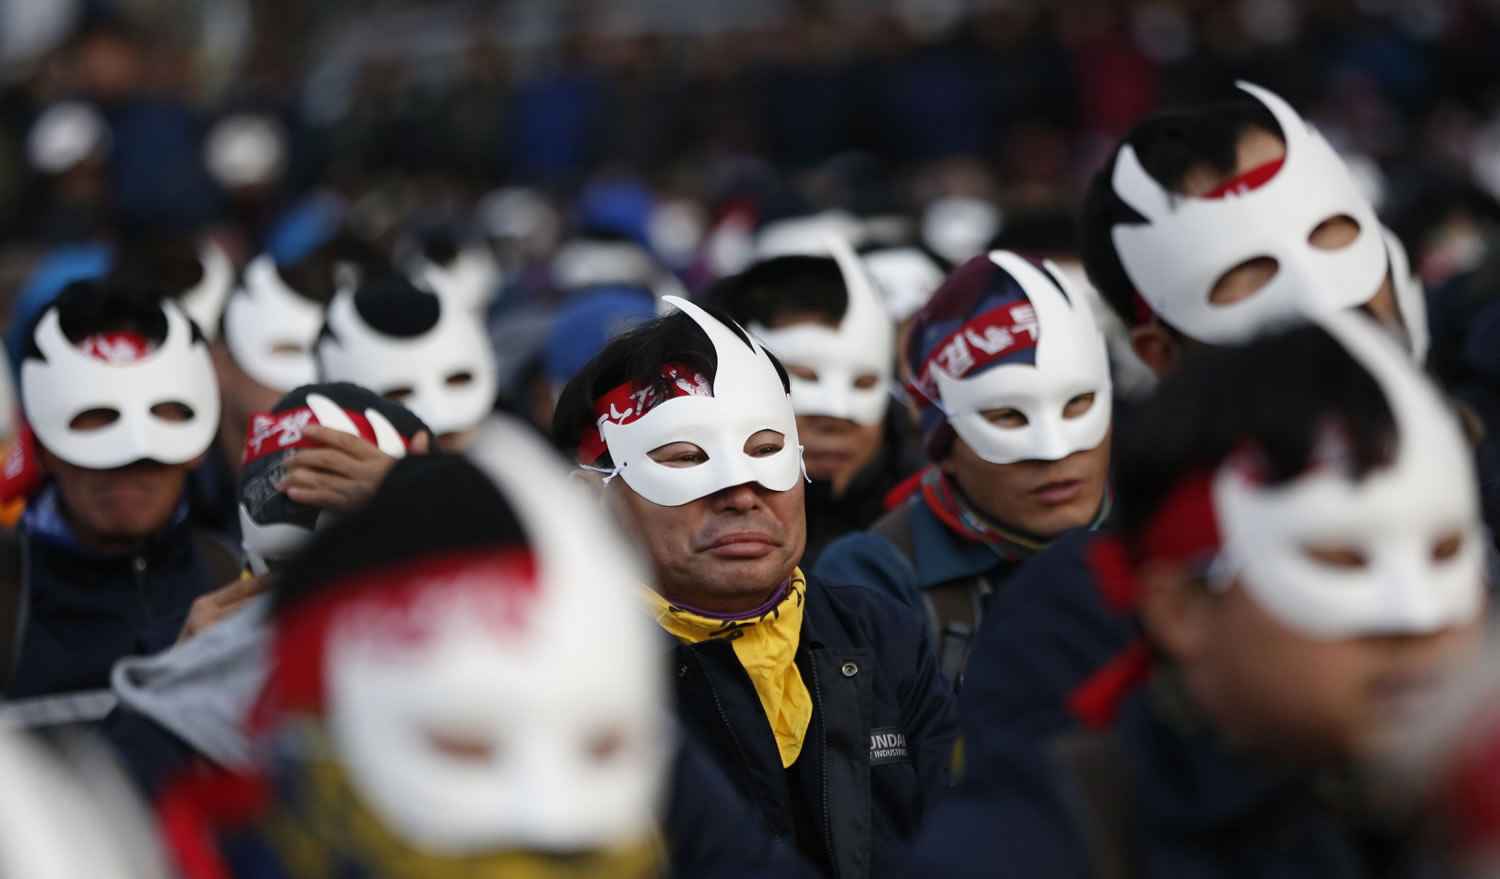 Masked protesters attend an anti-government rally Saturday in downtown Seoul, South Korea.